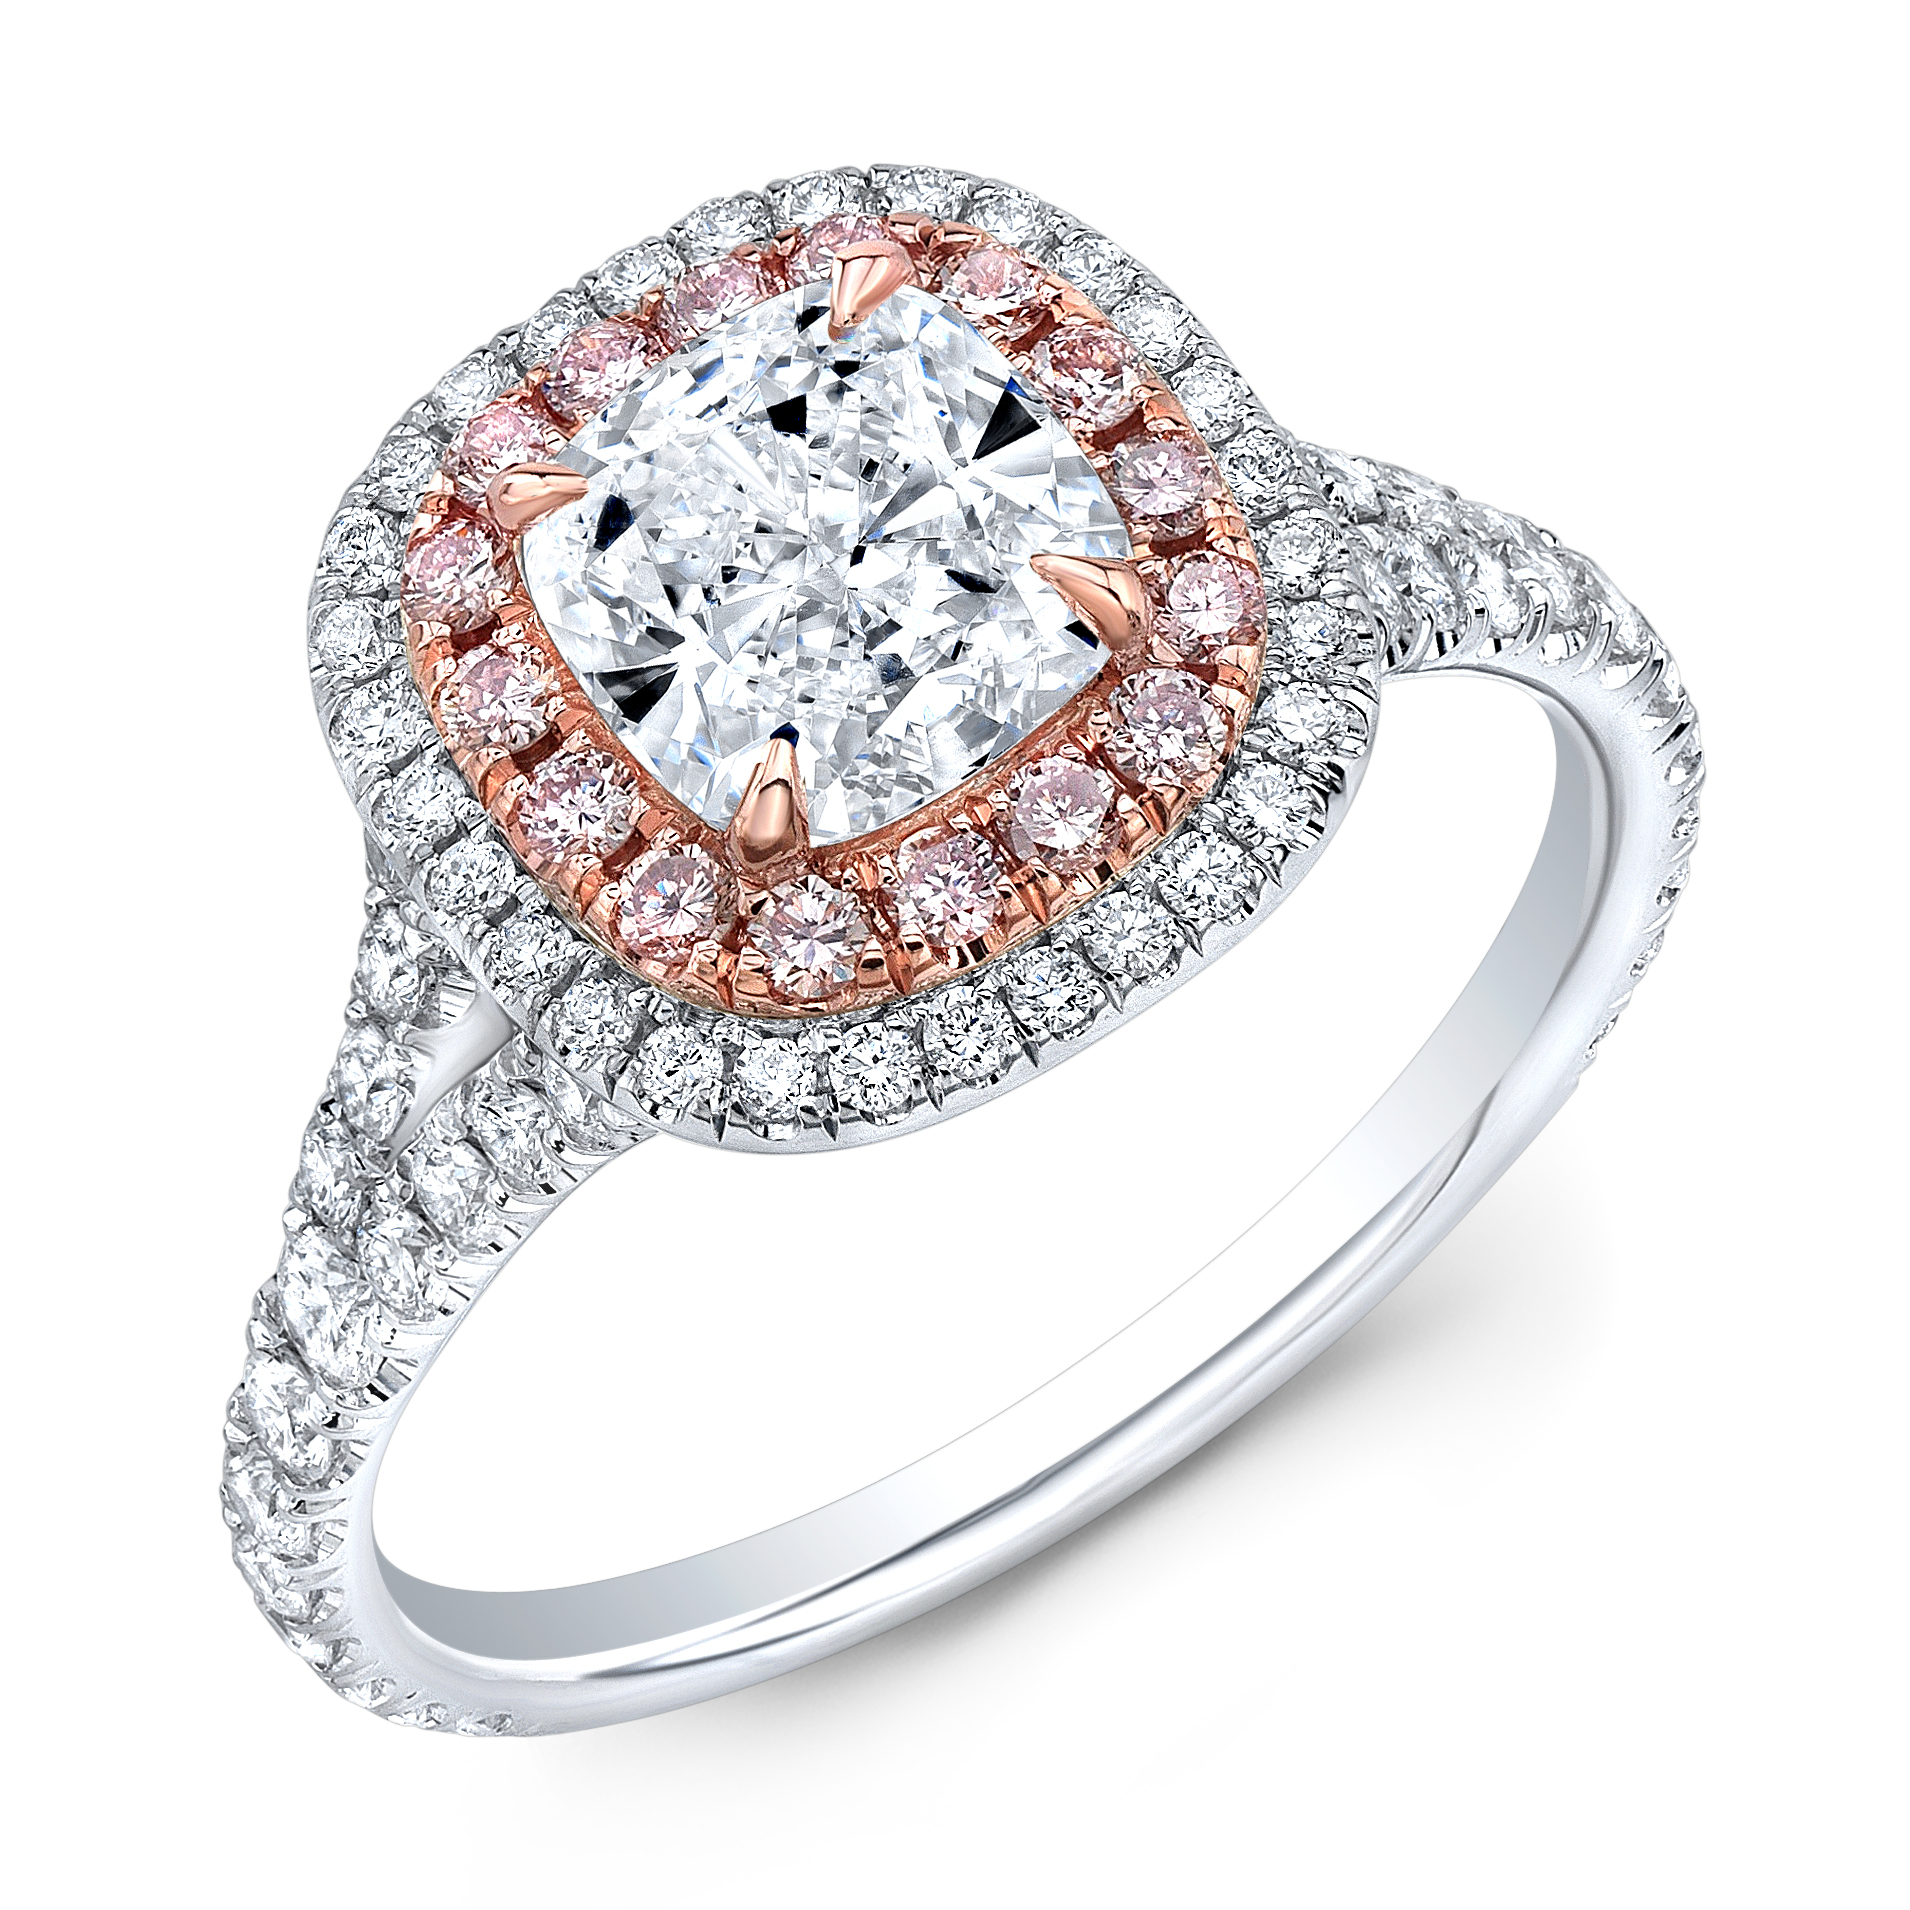 Double Halo Split Shank w/ Intense Pink Diamonds Engagement Ring in white gold 